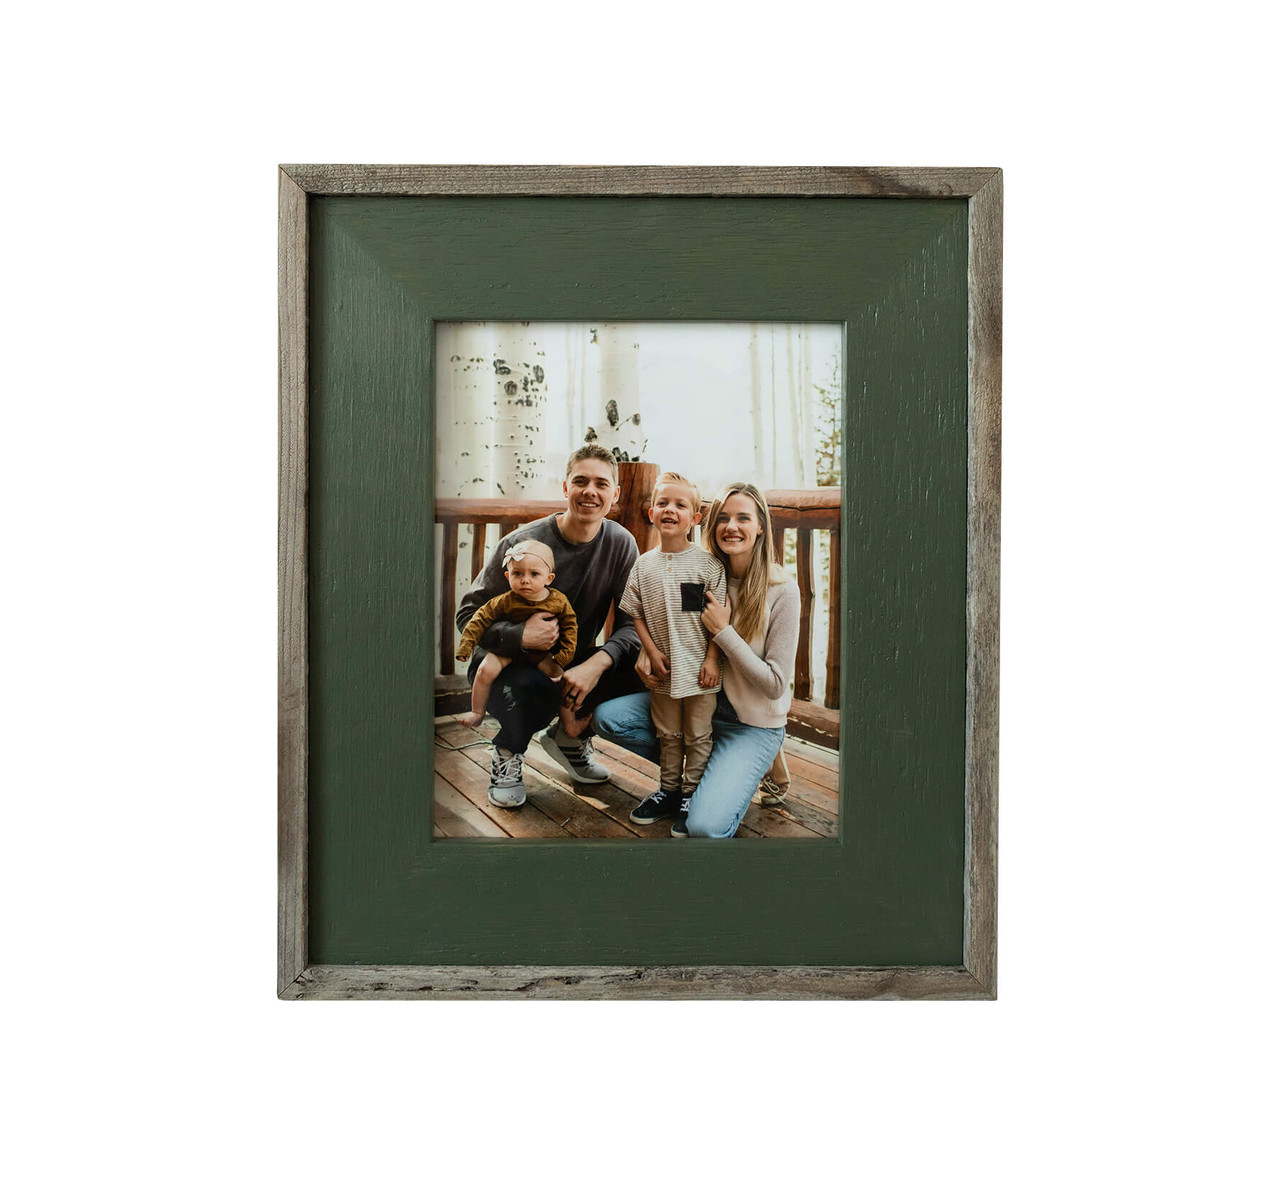 8x8 Barnwood Picture Frame - Lighthouse Green Rustic Wood Frame